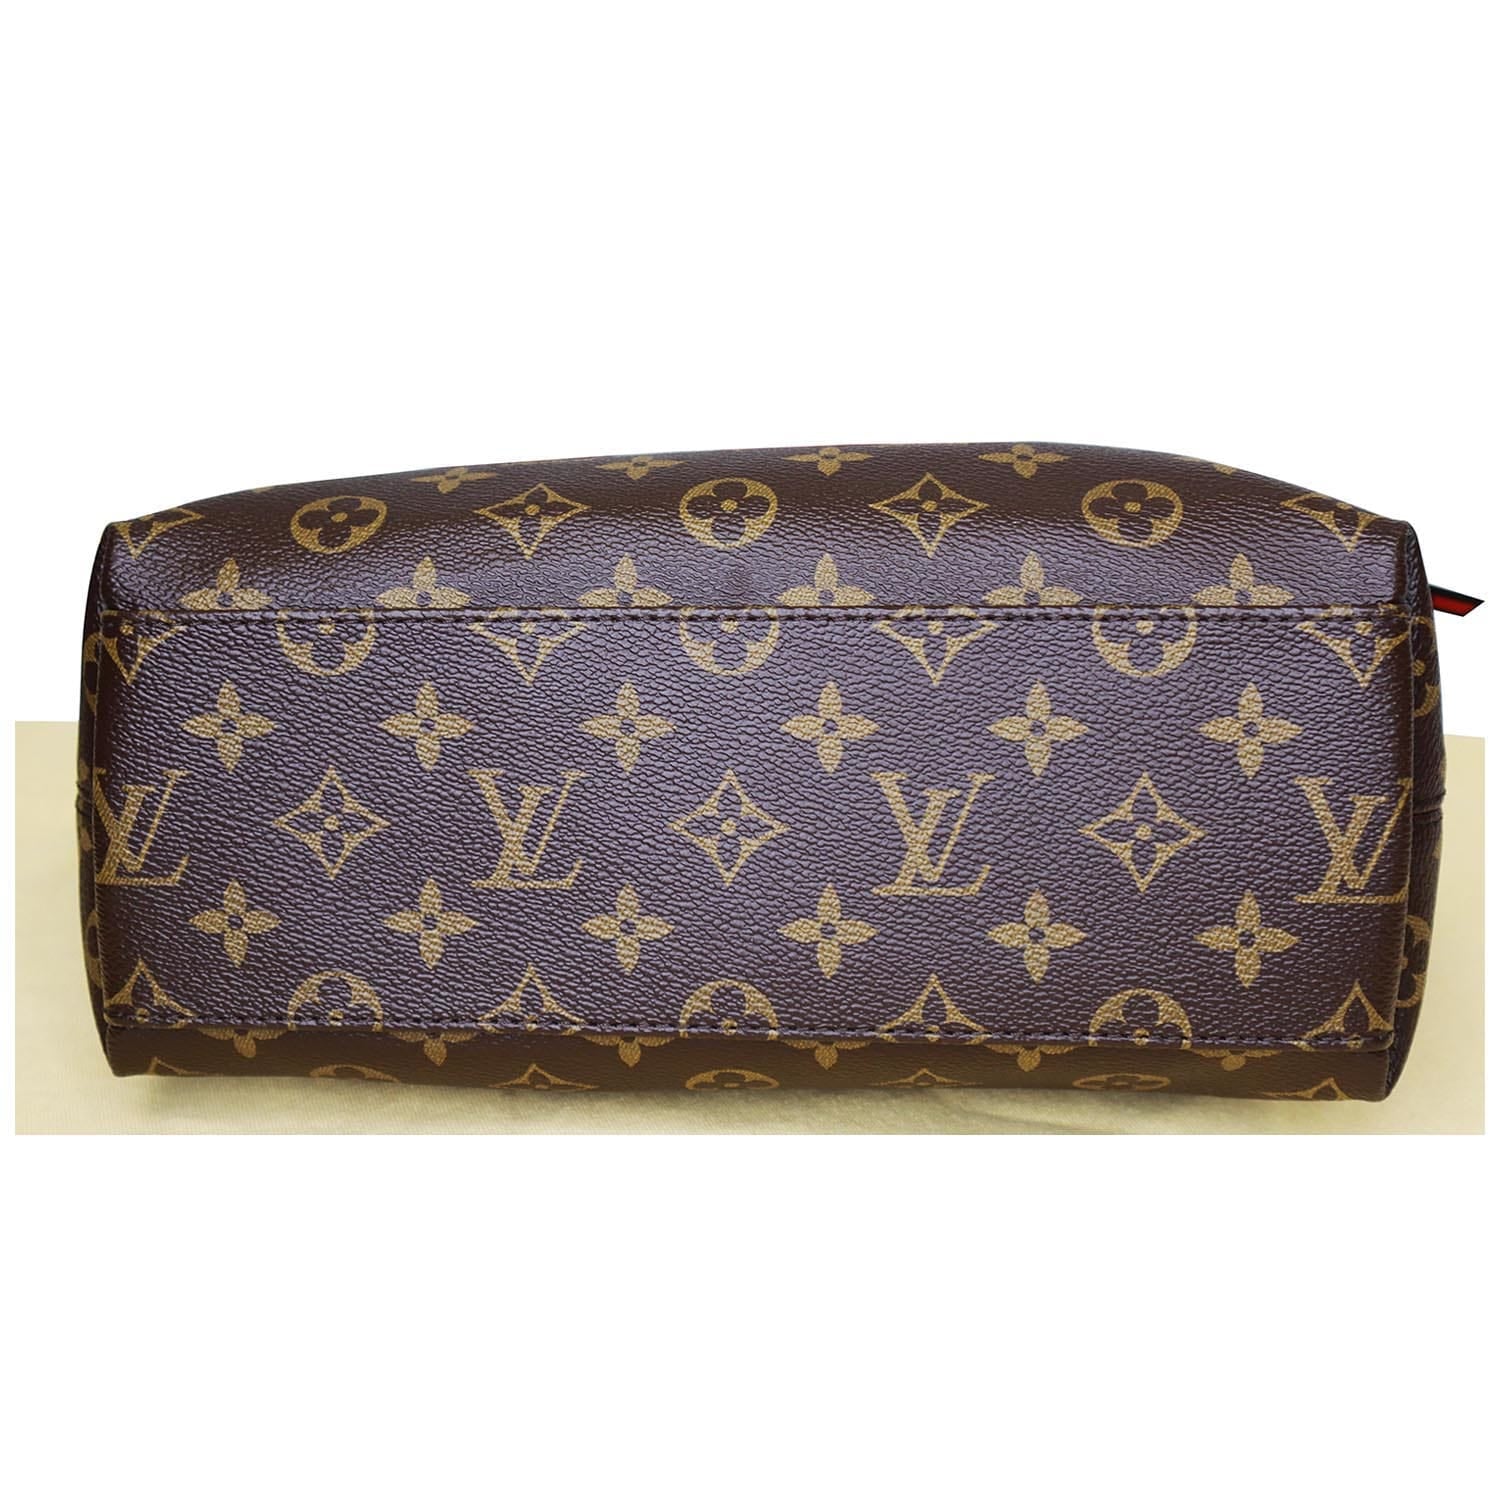 Louis Vuitton 2018 pre-owned Tuileries Besace 2way Bag - Farfetch